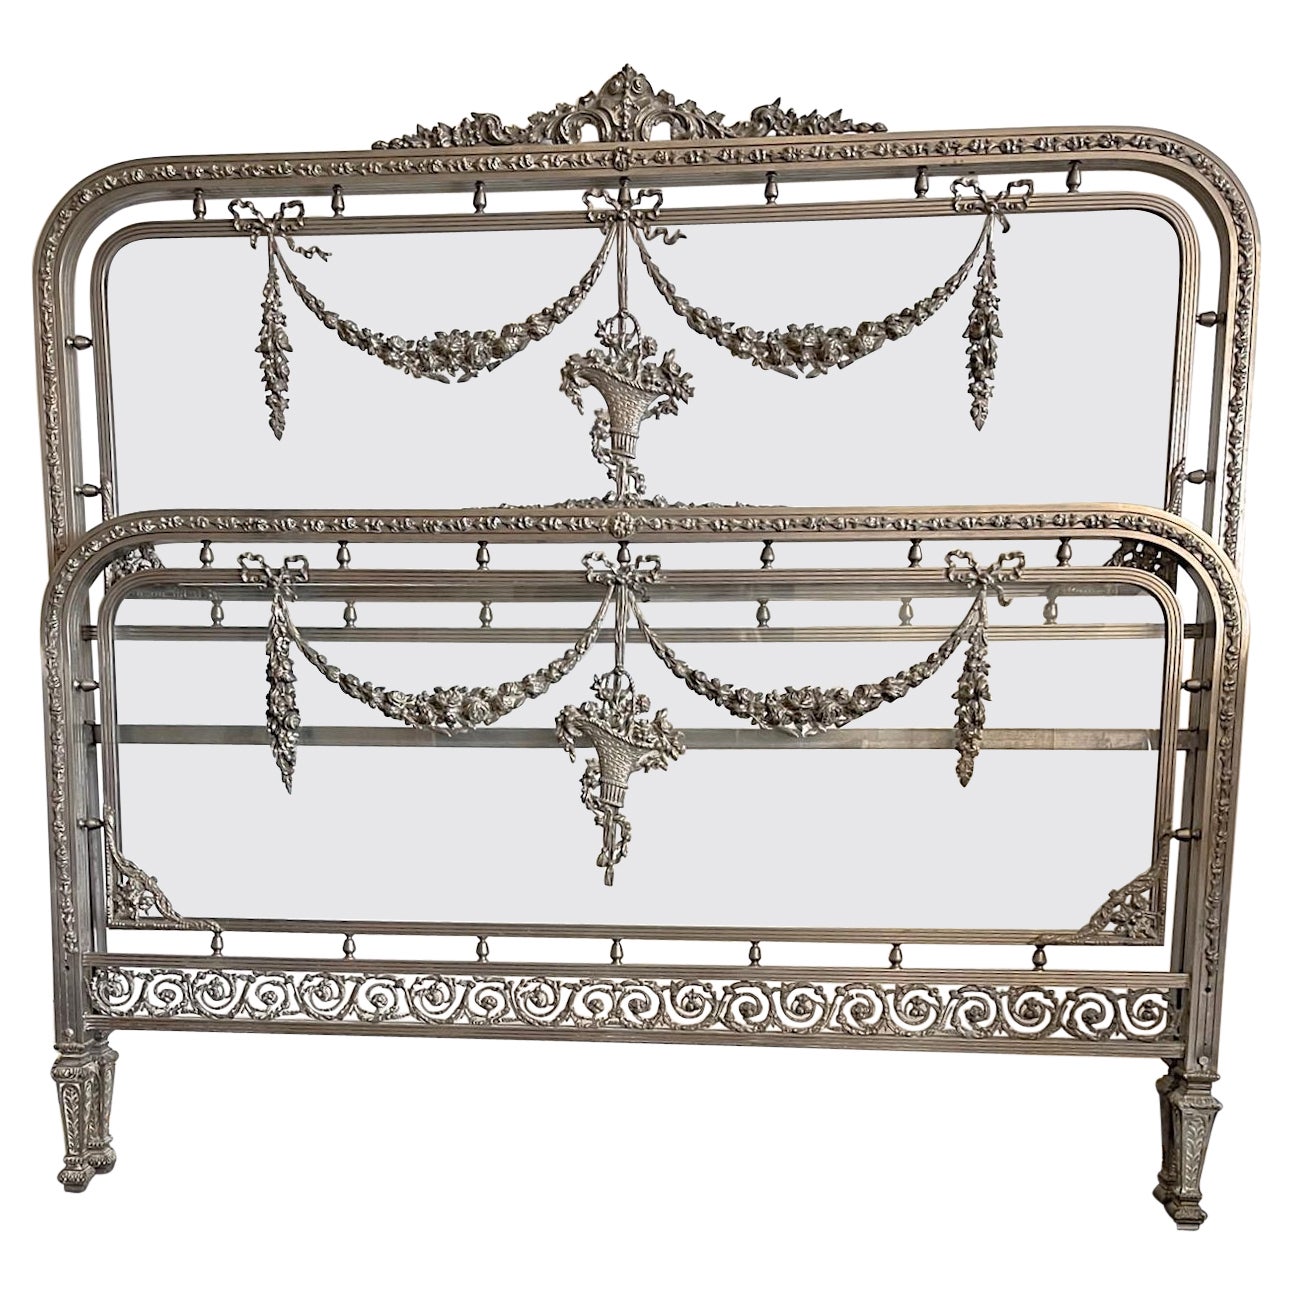 French 19th Century Louis XVI Metal and Glass Bed Frame with Head and Footboard